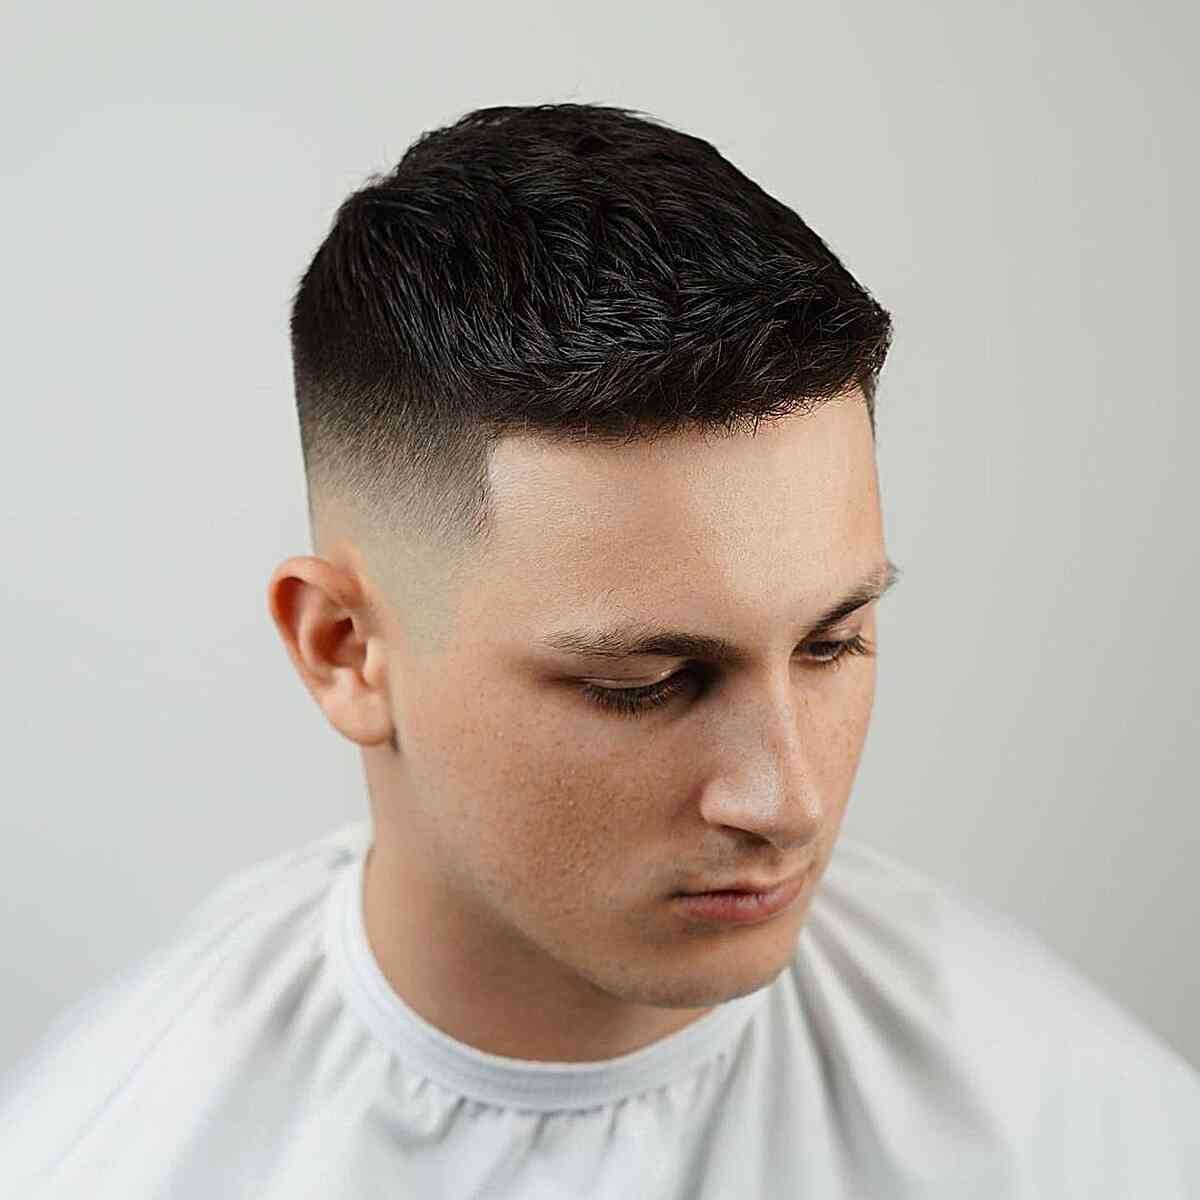 Fade (hairstyle) - Simple English Wikipedia, the free encyclopedia